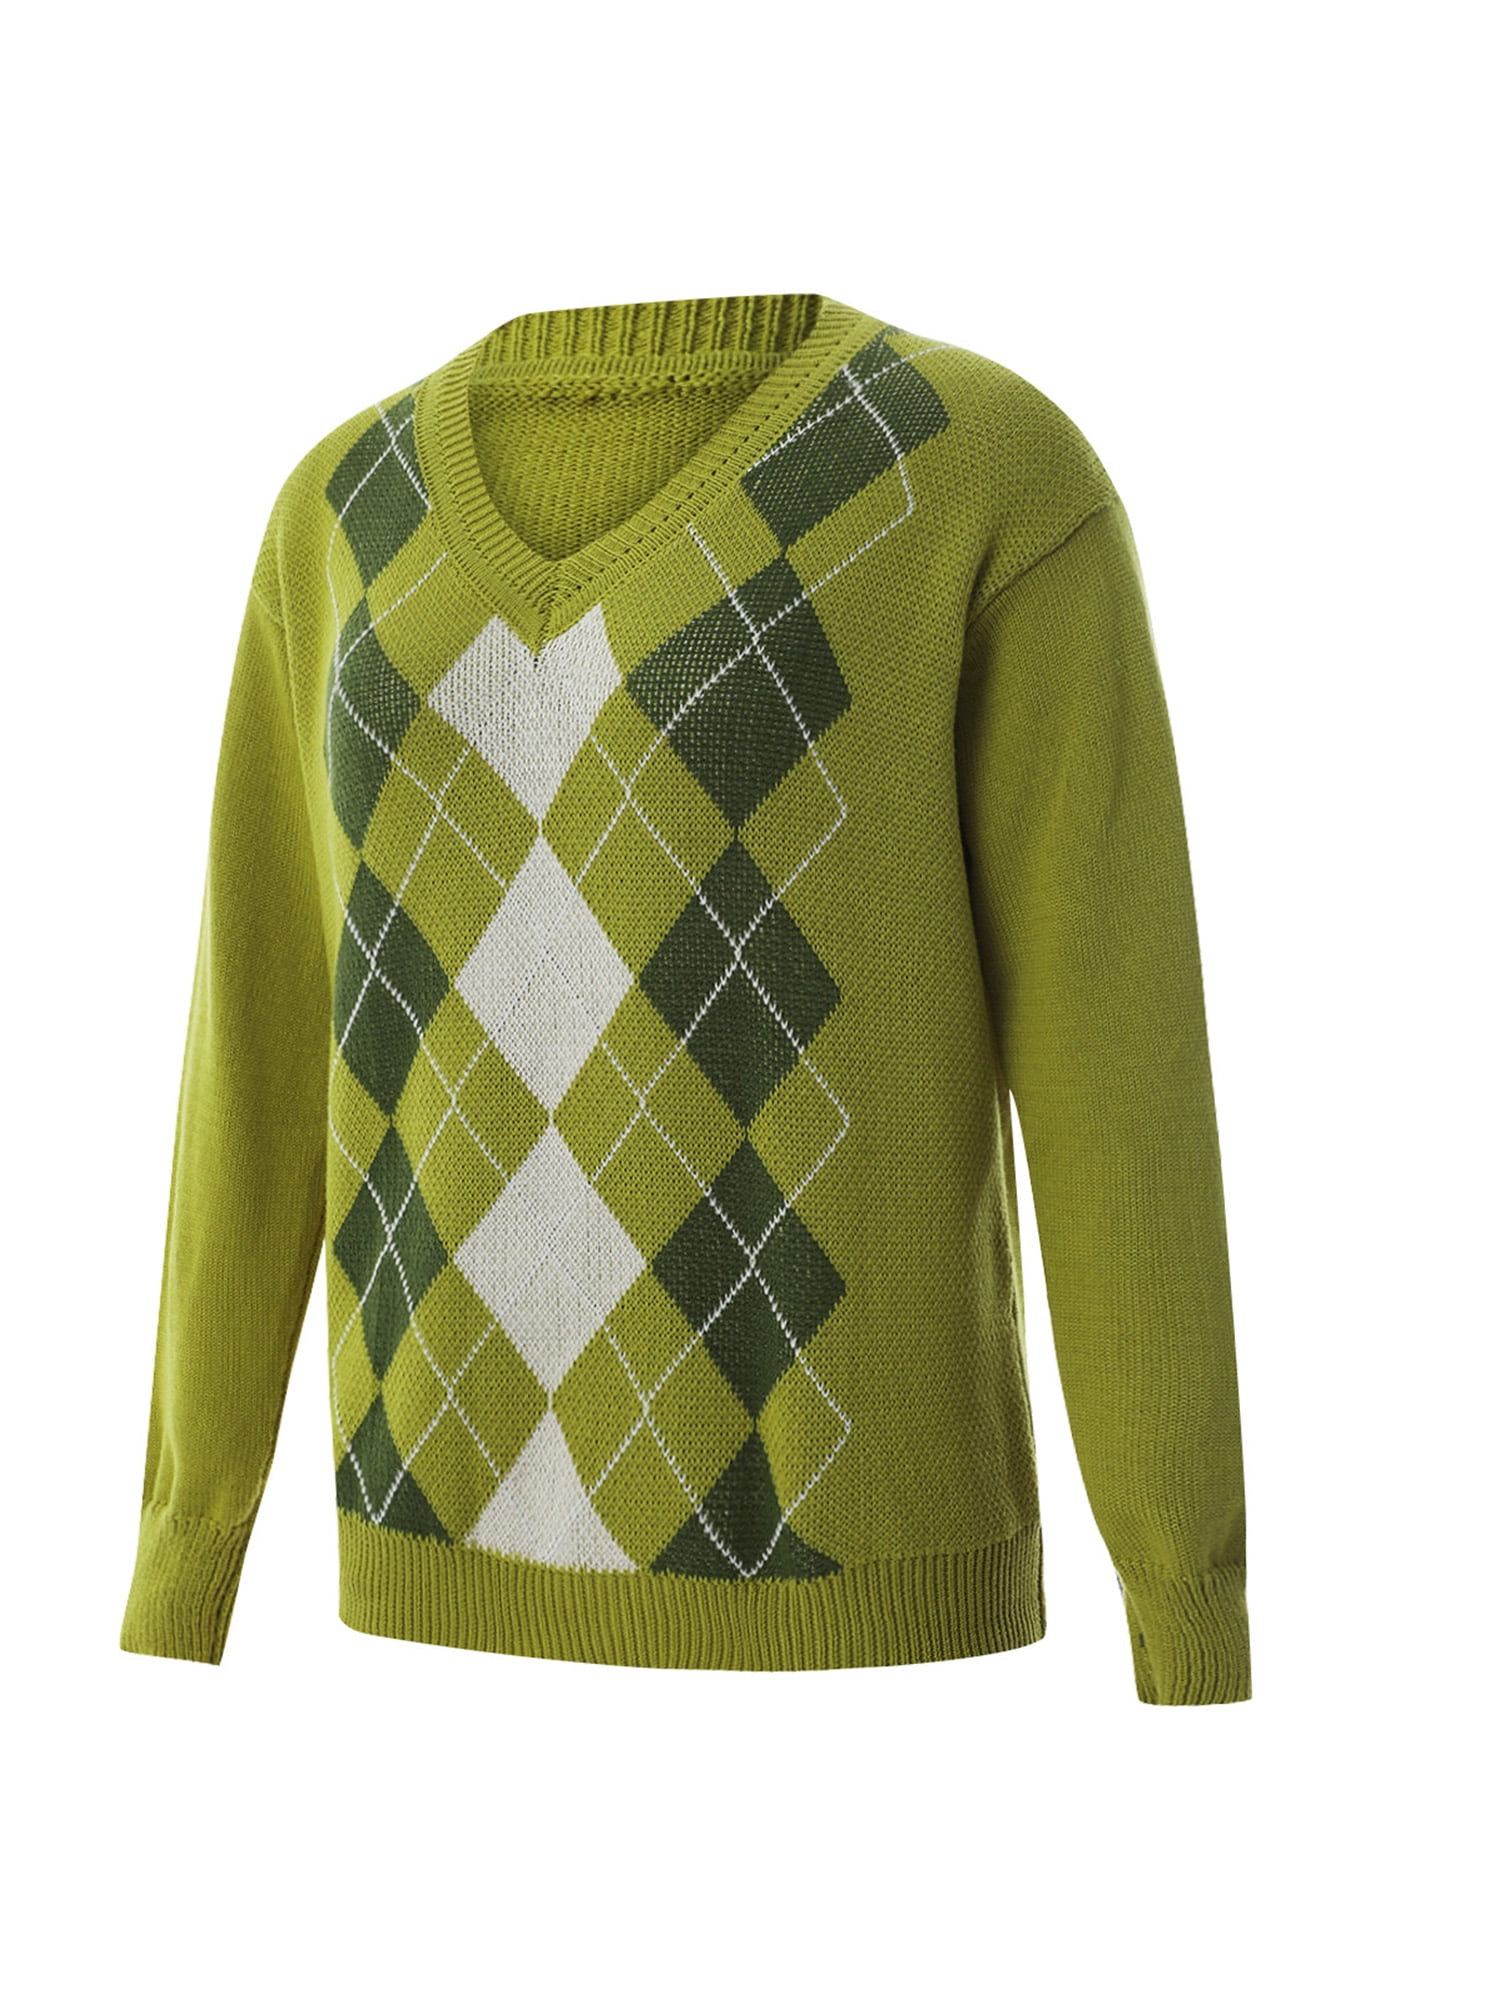 Green Argyle Sweater by OPEN YY on Sale